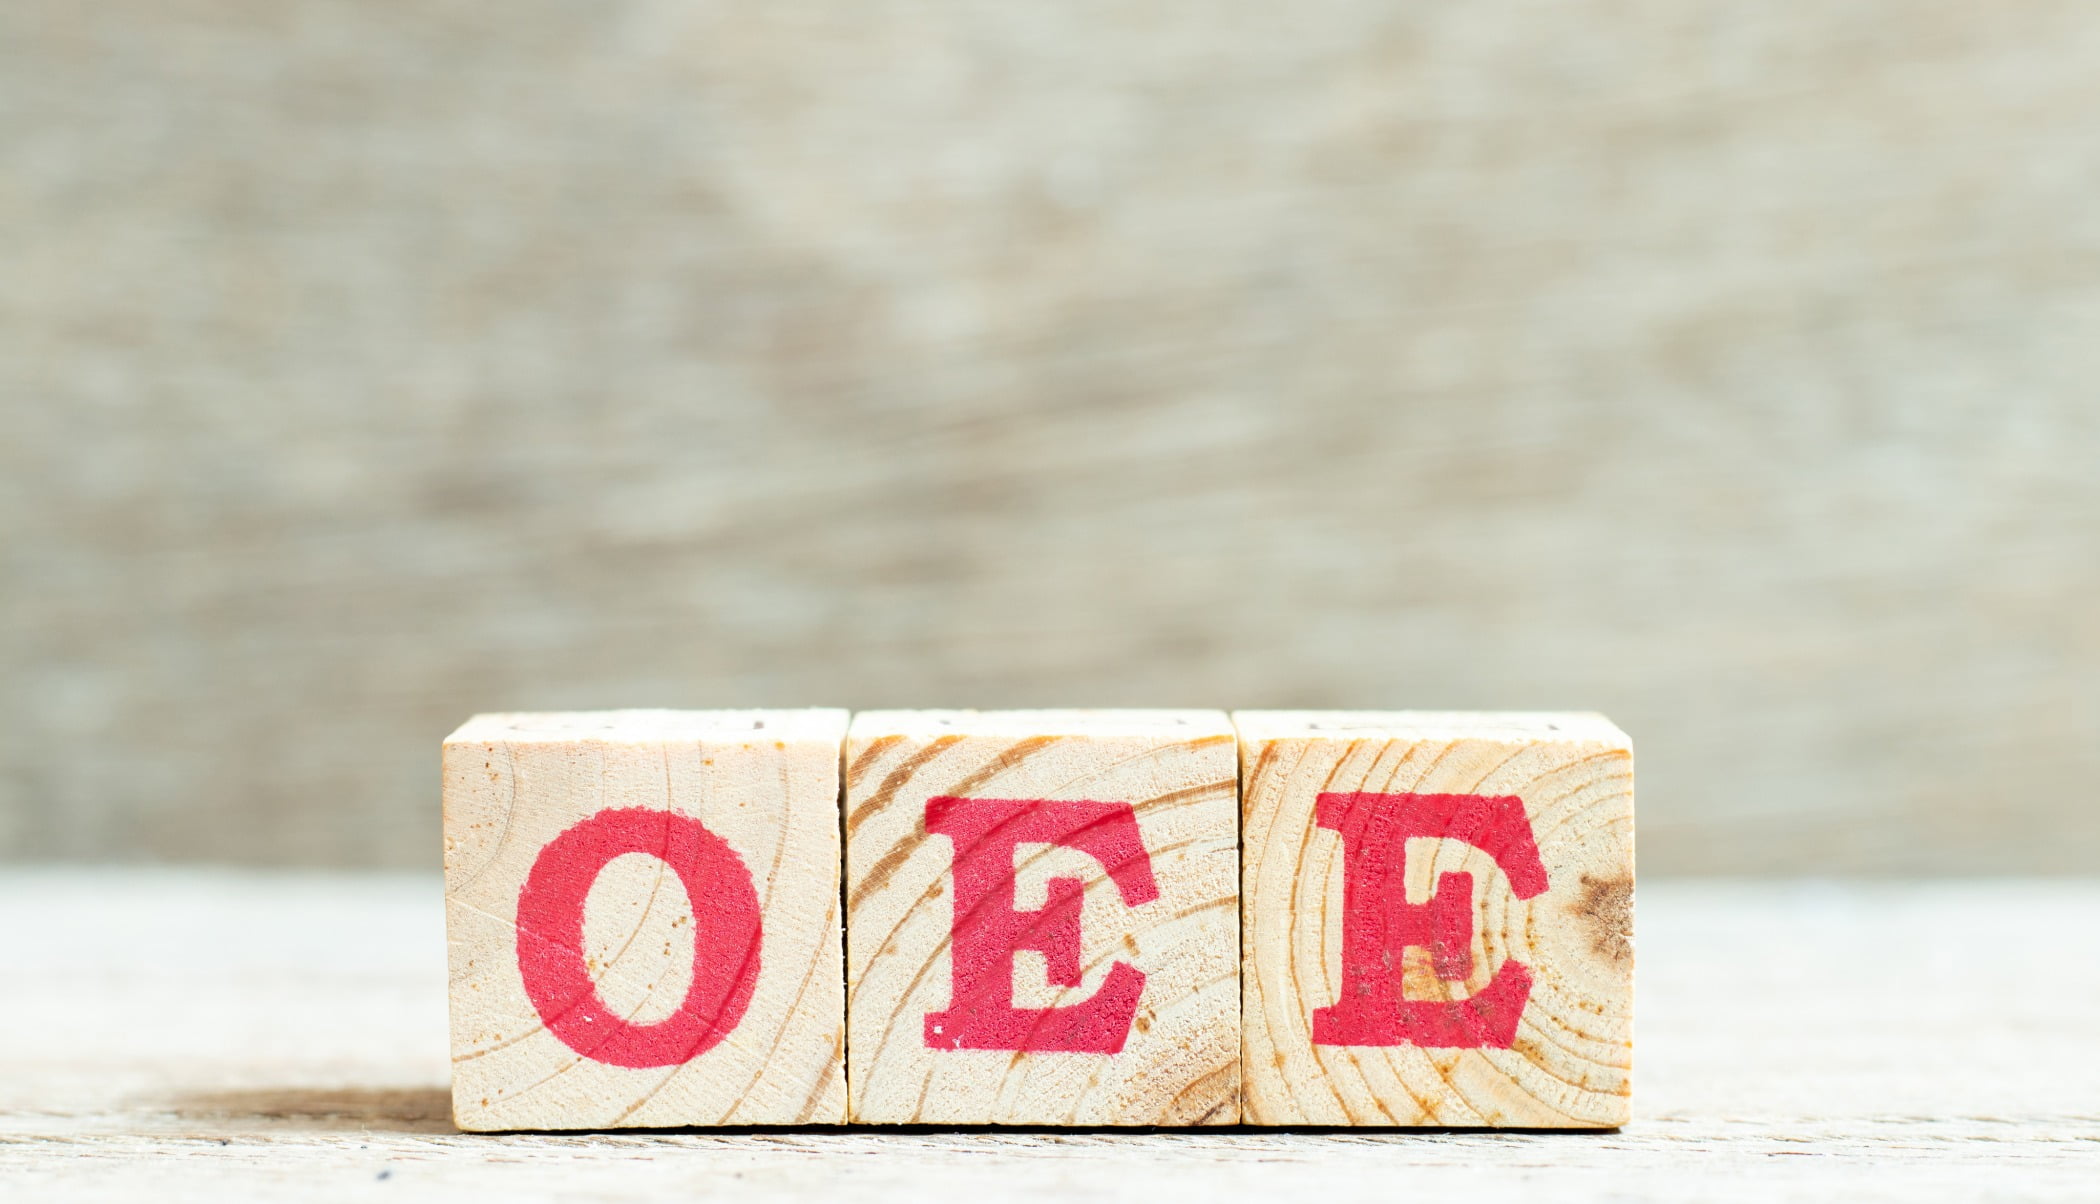 OEE-Getty-Images/bankrx